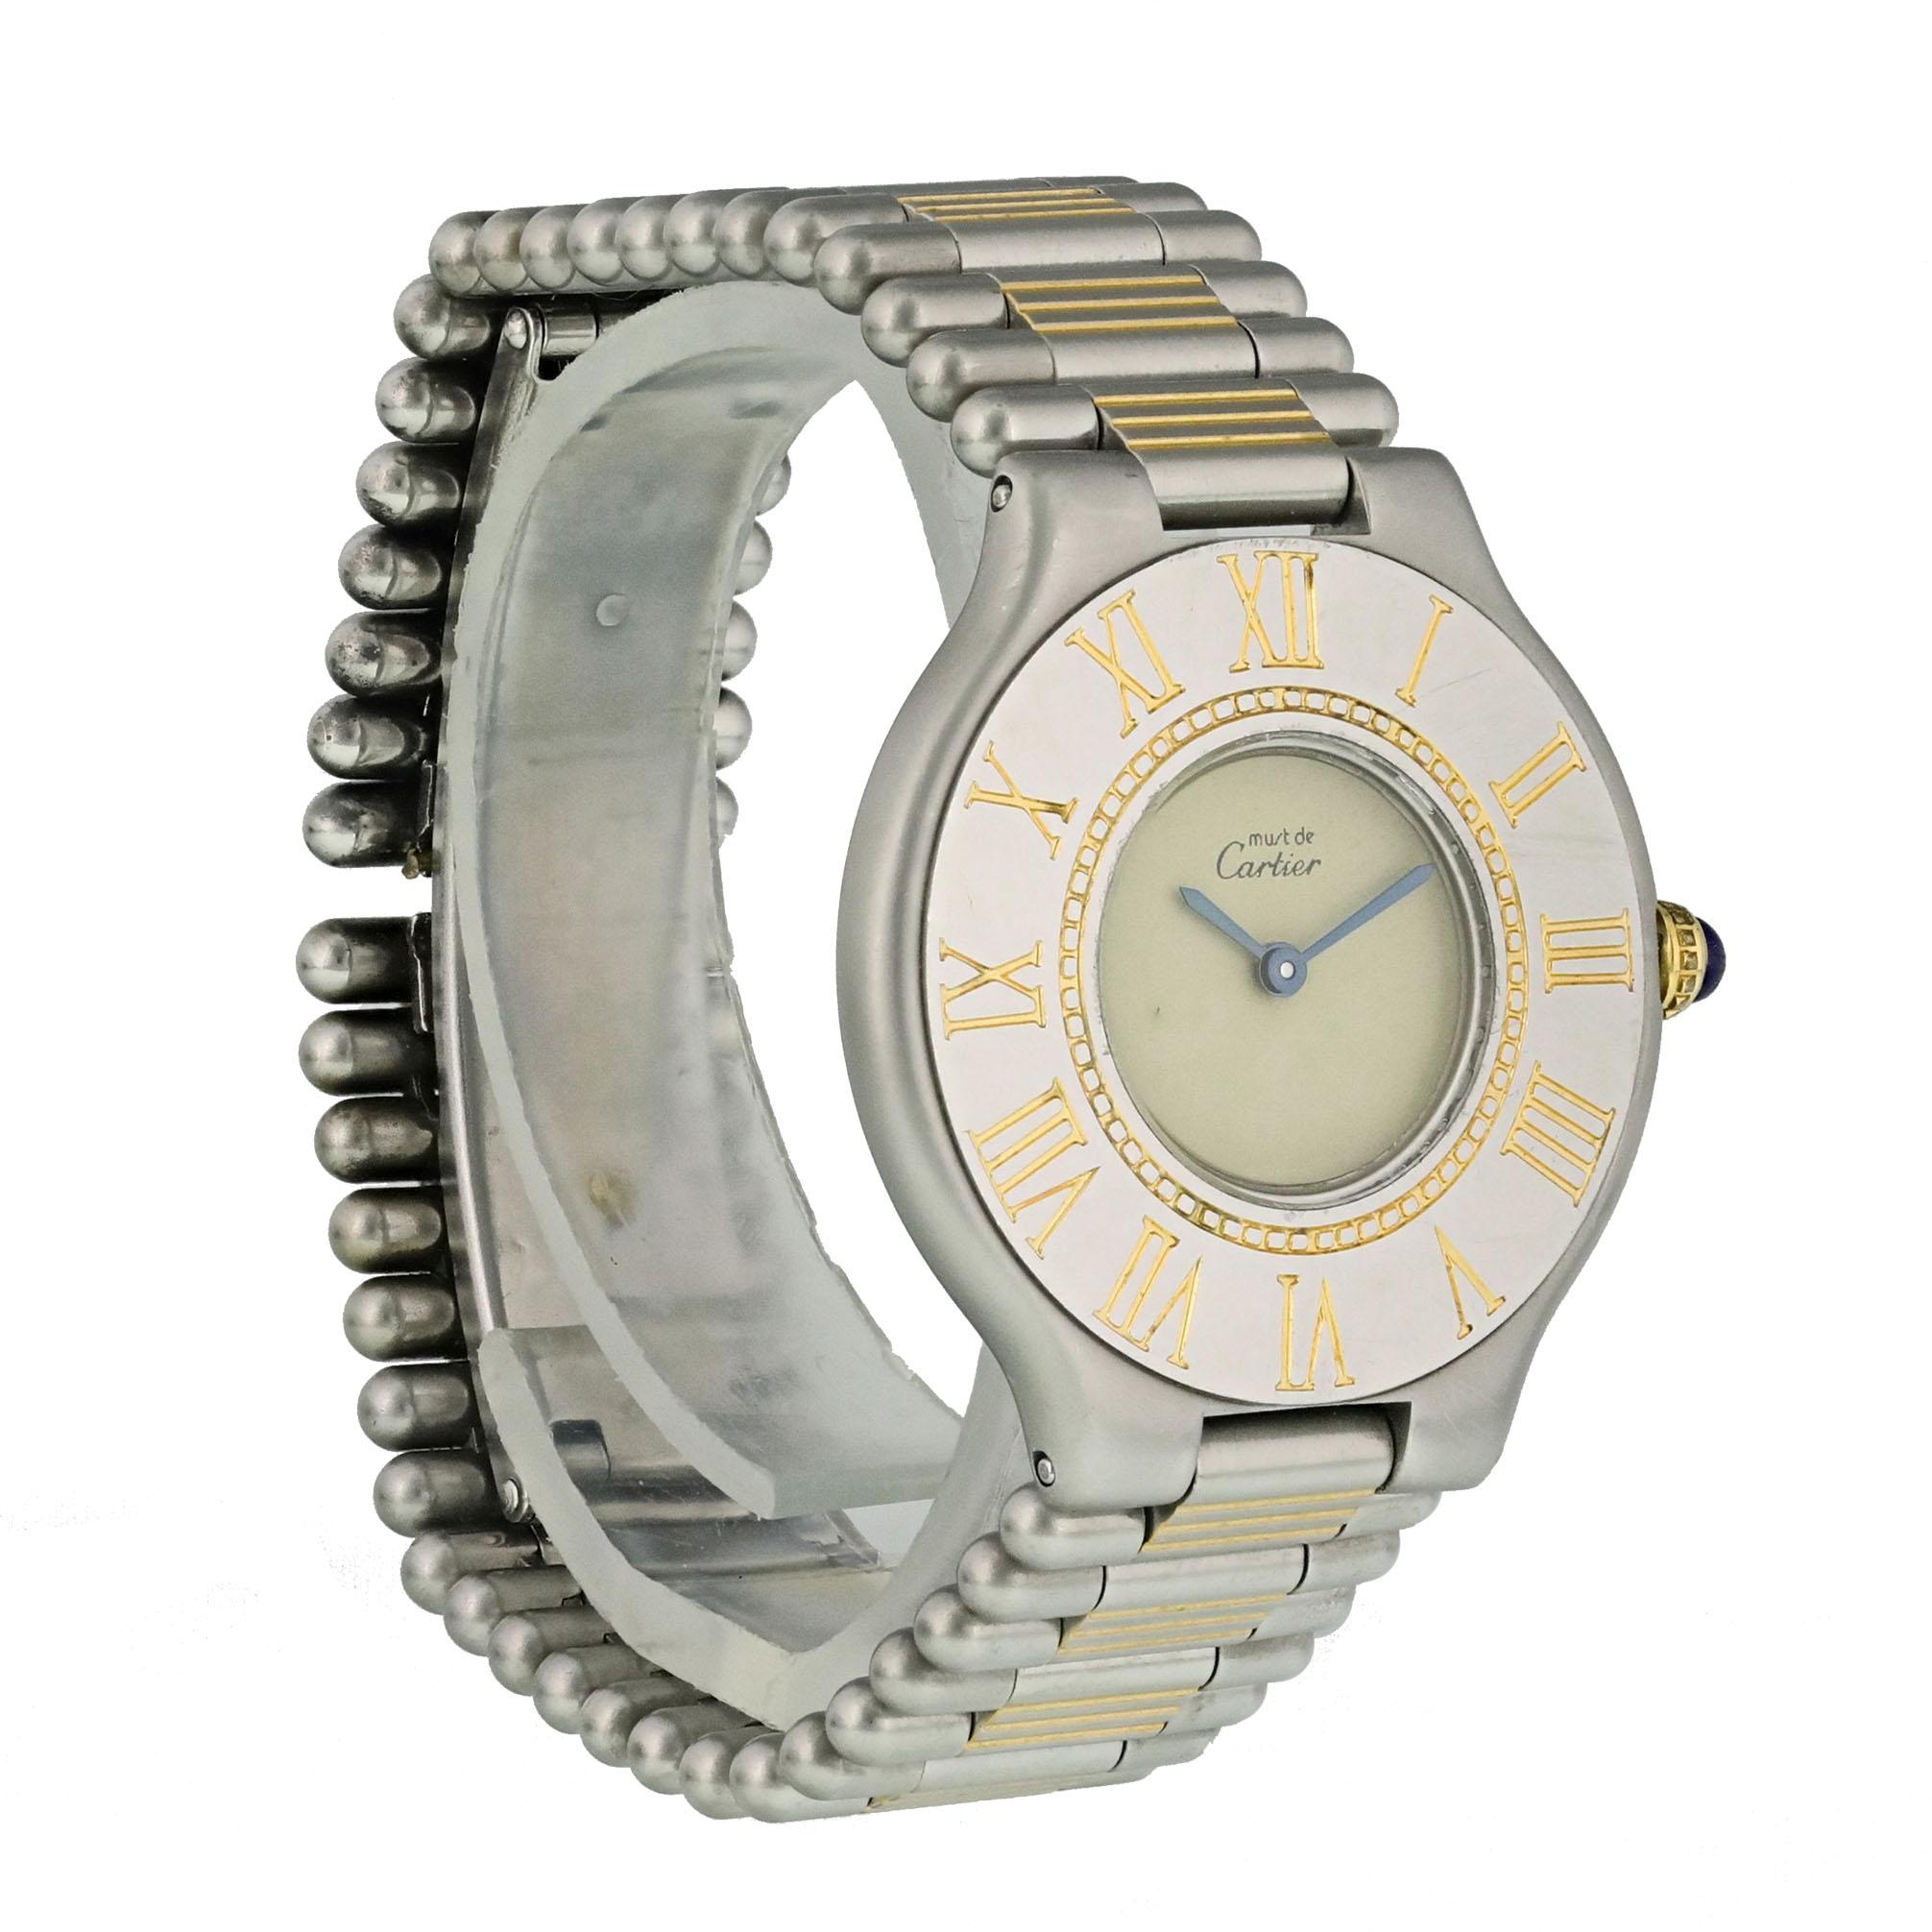 Cartier Must de Cartier Ladies Watch.
28mm Stainless Steel case. 
Stainless Steel bezel with Roman numeral hour markers. 
Minute markers on the inner bezel.
Off-White dial with Blue steel hands. 
Stainless Steel Bracelet with Butterfly Clasp. 
Will